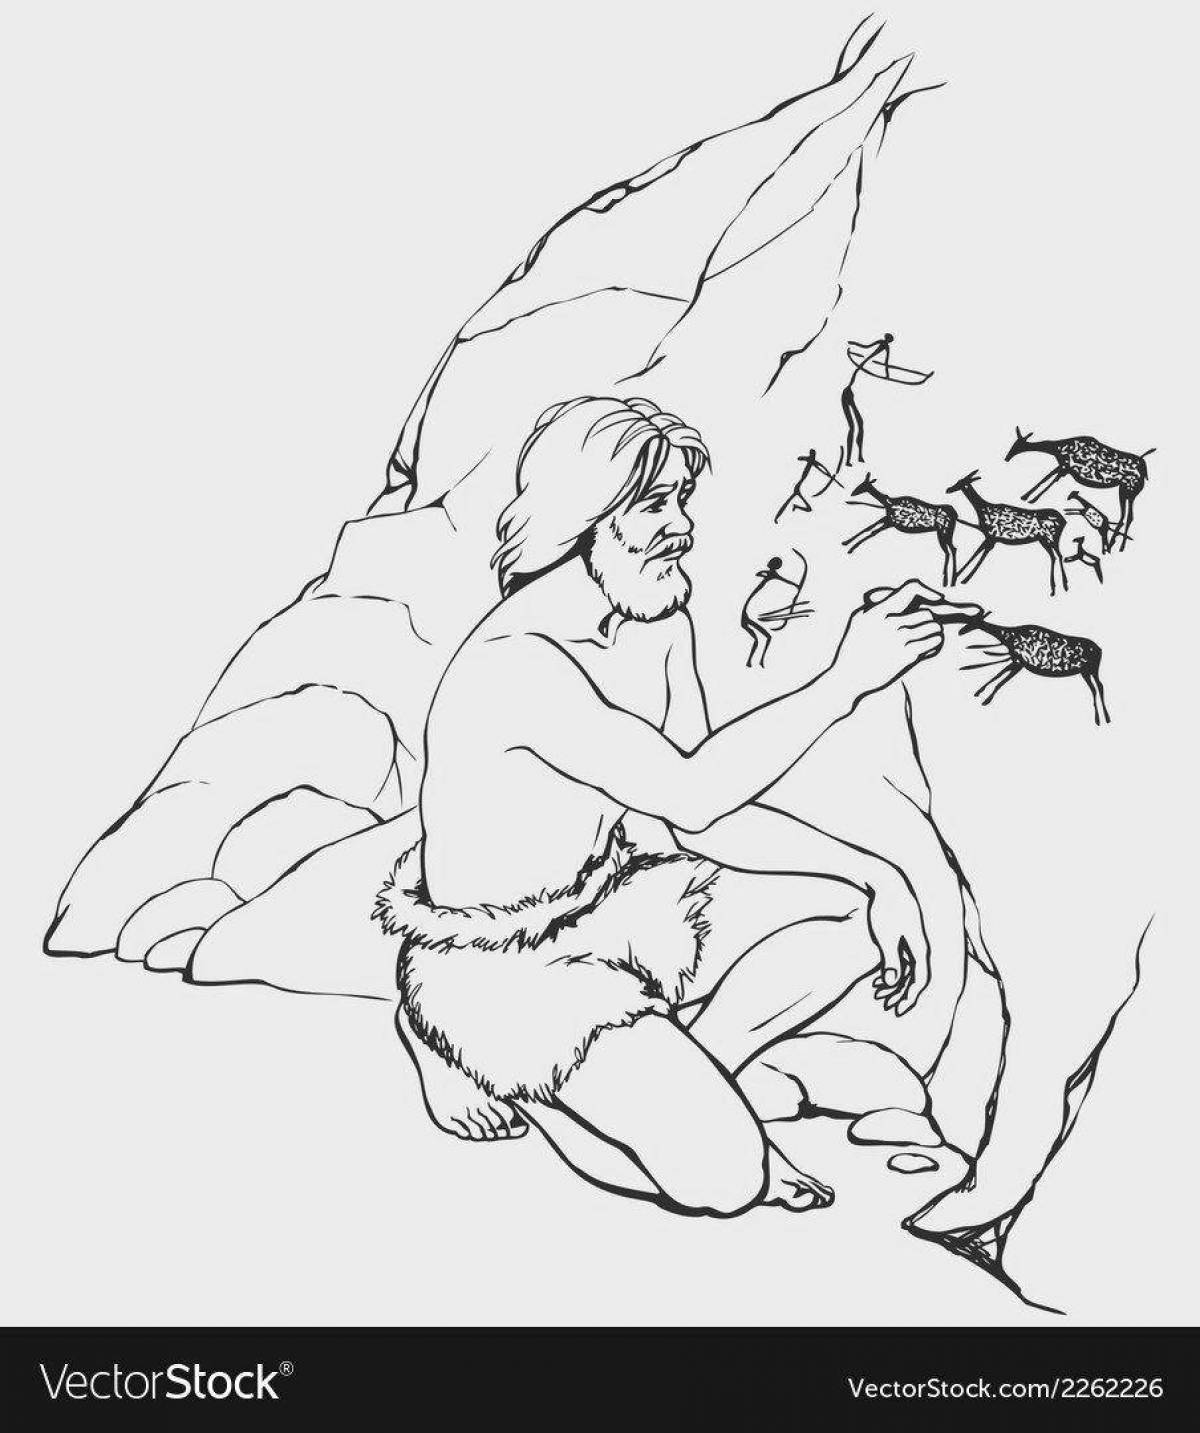 Exciting coloring pages of prehistoric professions